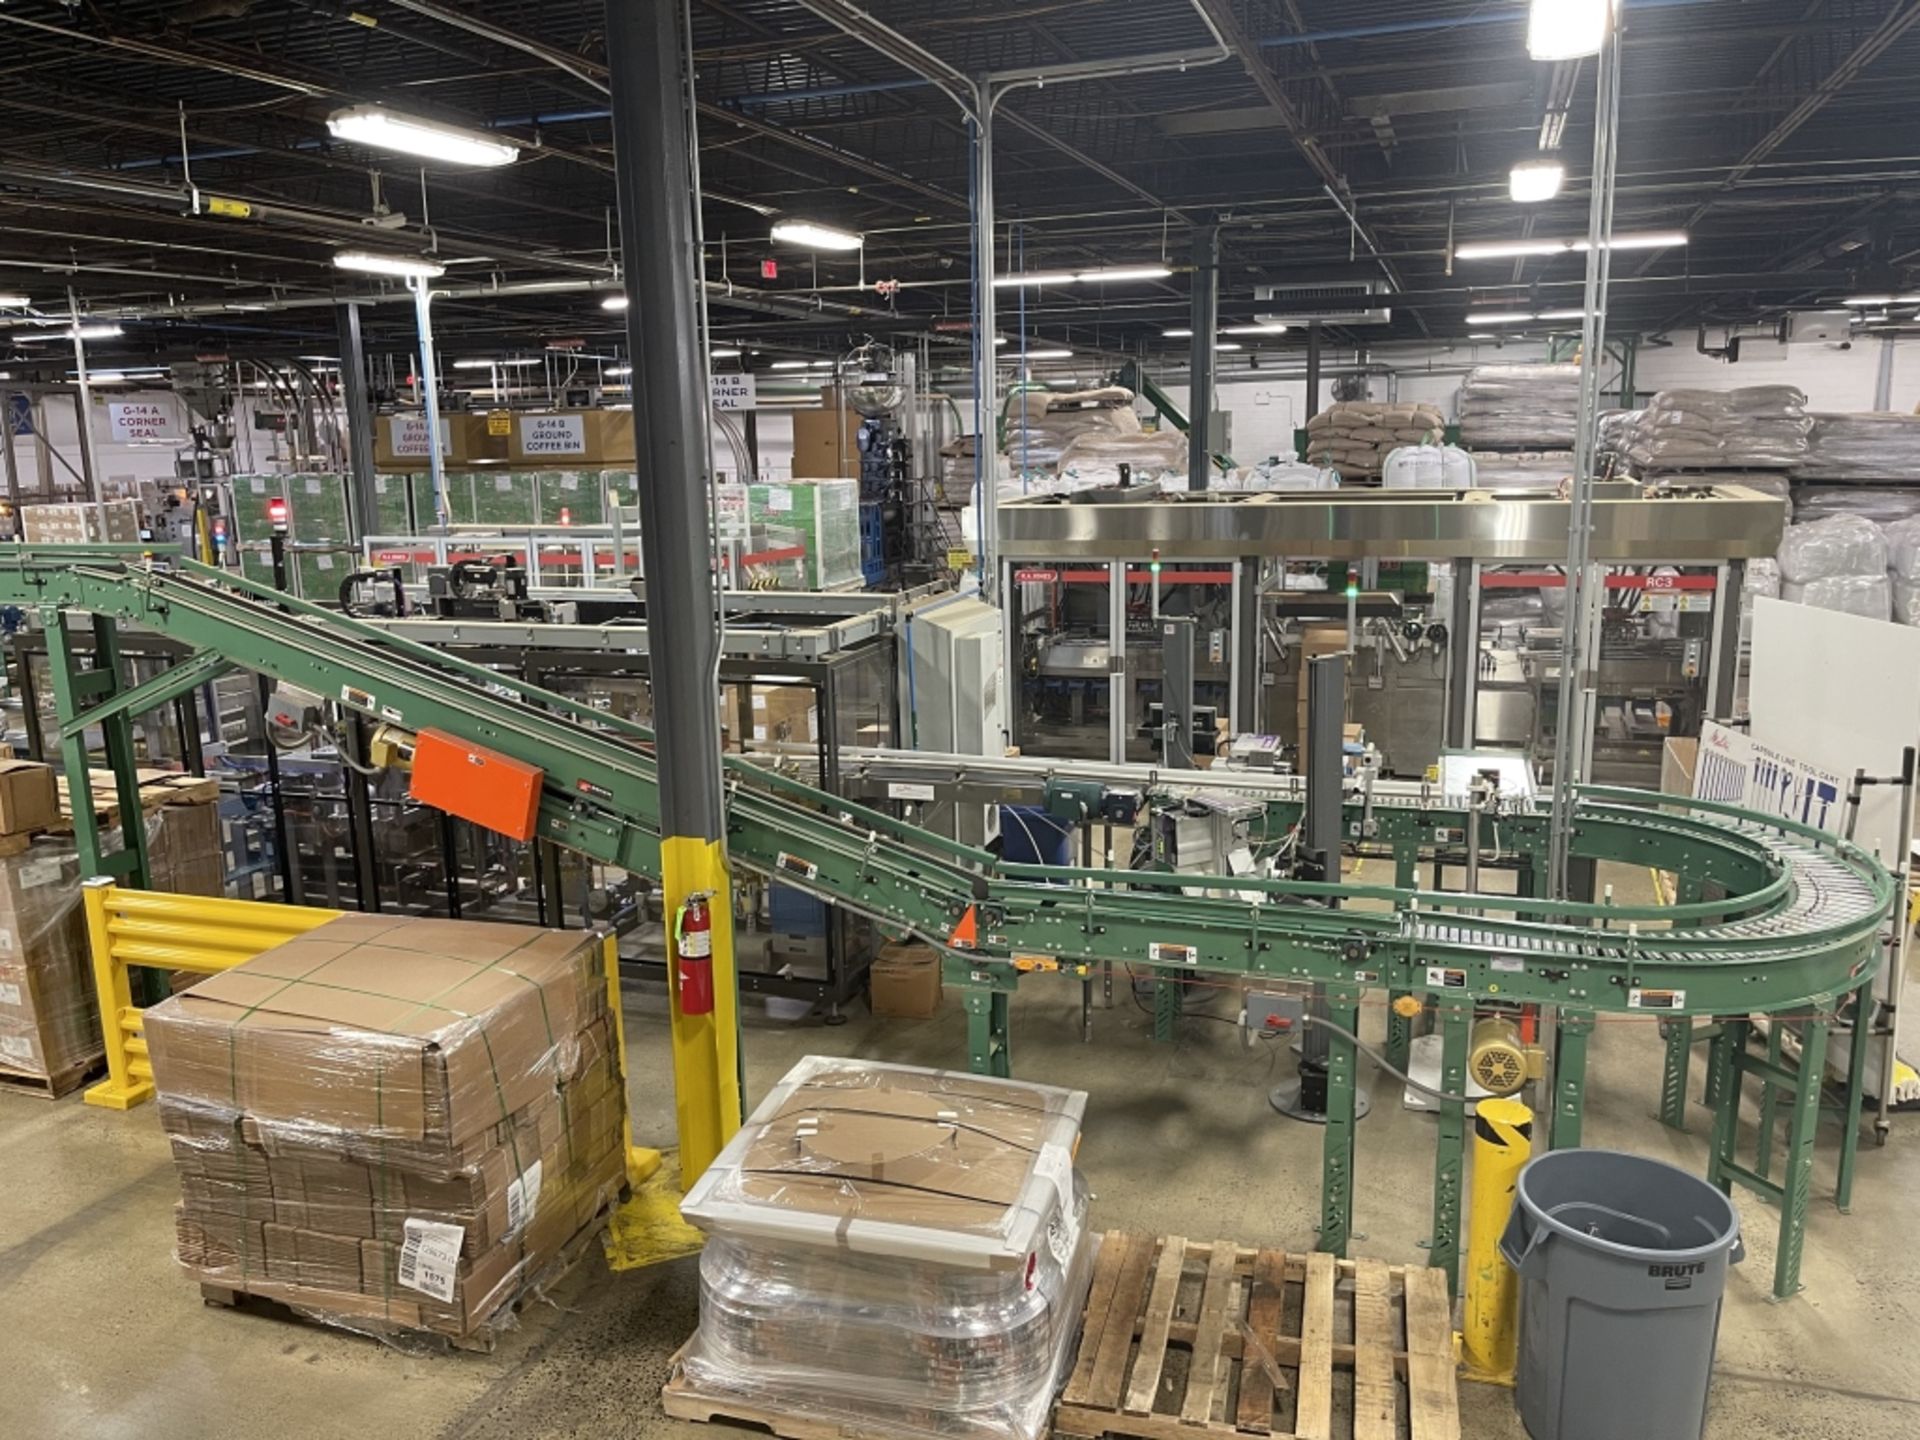 CASE CONVEYOR SYSTEMS ON PRODUCTION LINE (2019 MFG)(INV#83150)(Loading, Handling & Site Management - Image 2 of 11